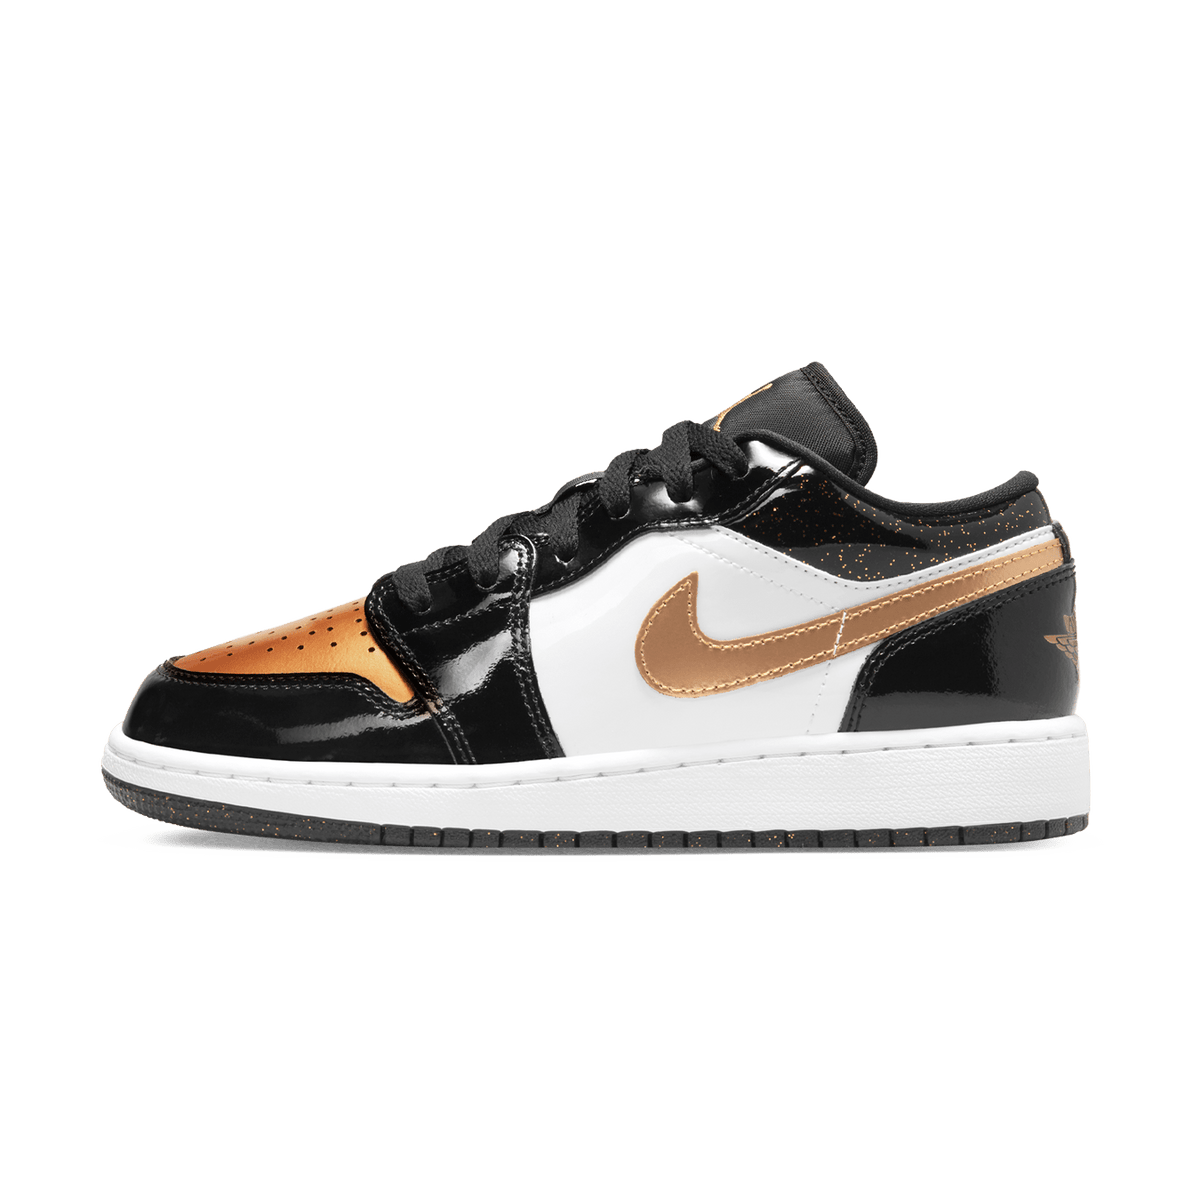 nike air boom price in africa south africa today Low SE GS 'Gold Toe' - JuzsportsShops